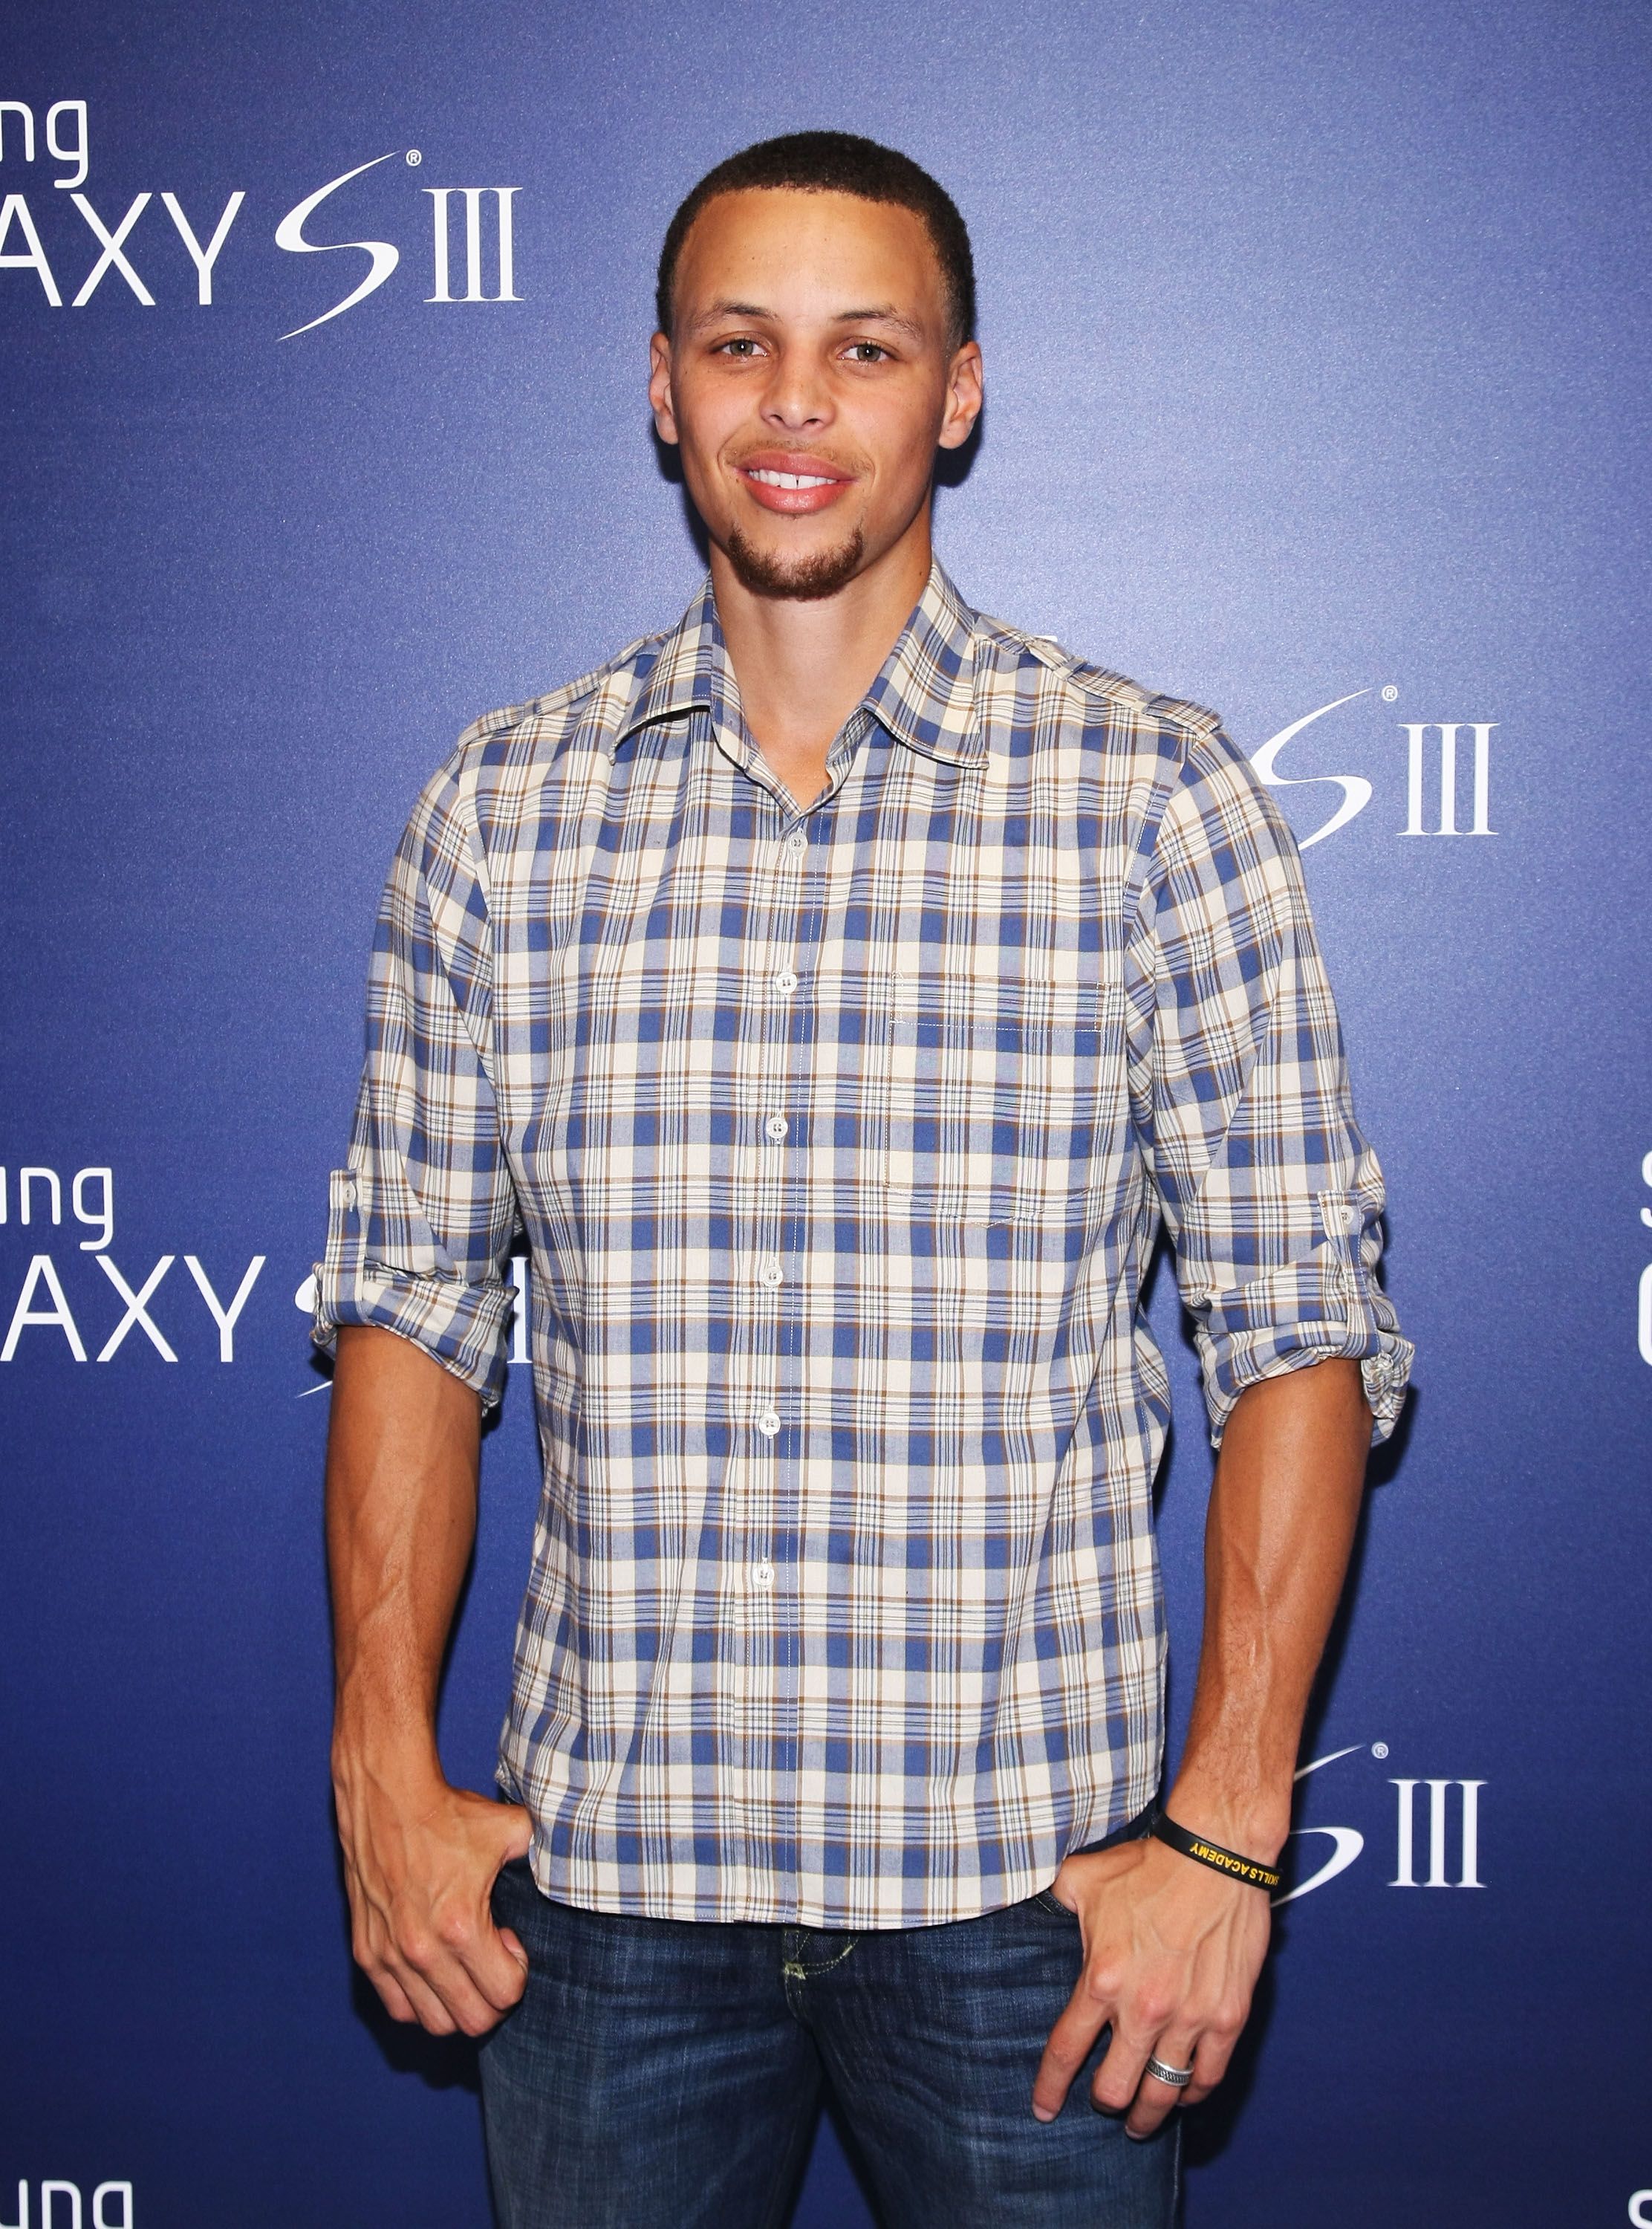 Stephen Curry at the Samsung Galaxy S III Launch hosted by Ashley Greene at Skylight Studios on June 20, 2012 in New York City. | Source: Getty Images